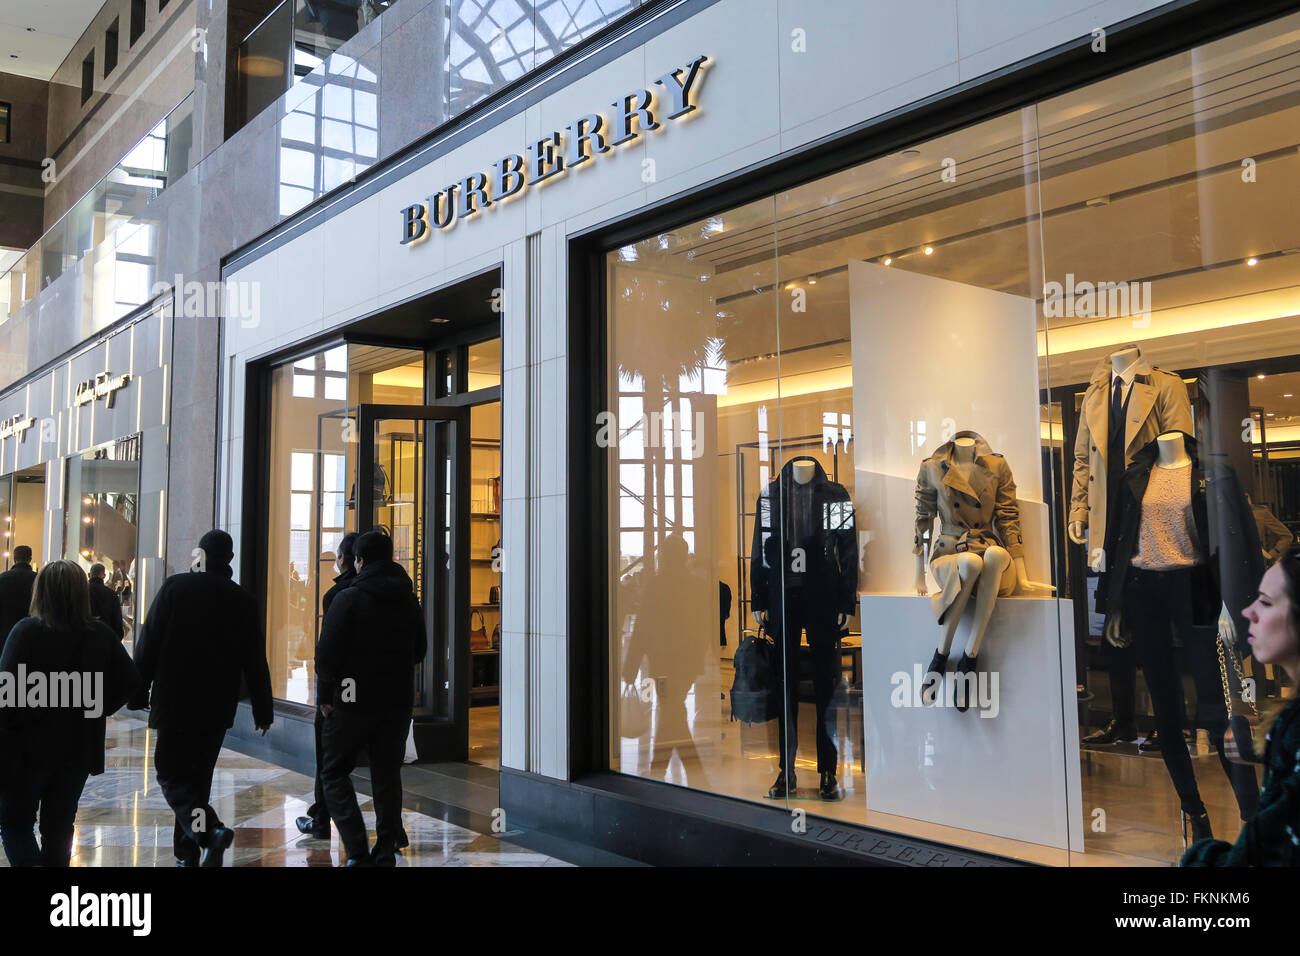 burberry outlet near me